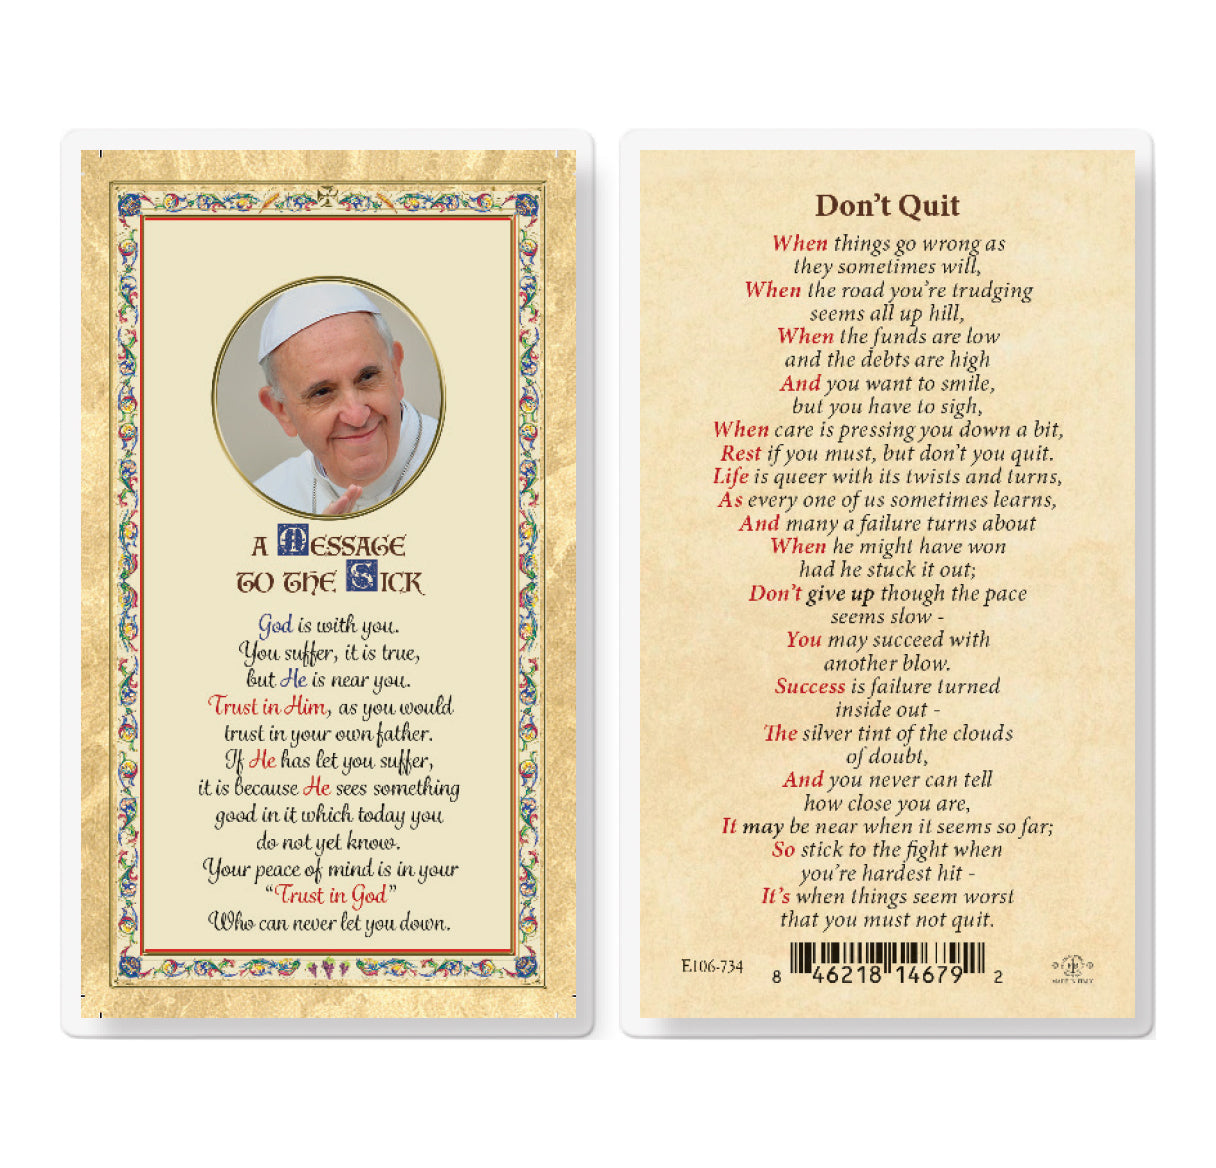 Message to the Sick - Don't Quit Gold-Stamped Laminated Catholic Prayer Holy Card with Prayer on Back, Pack of 25